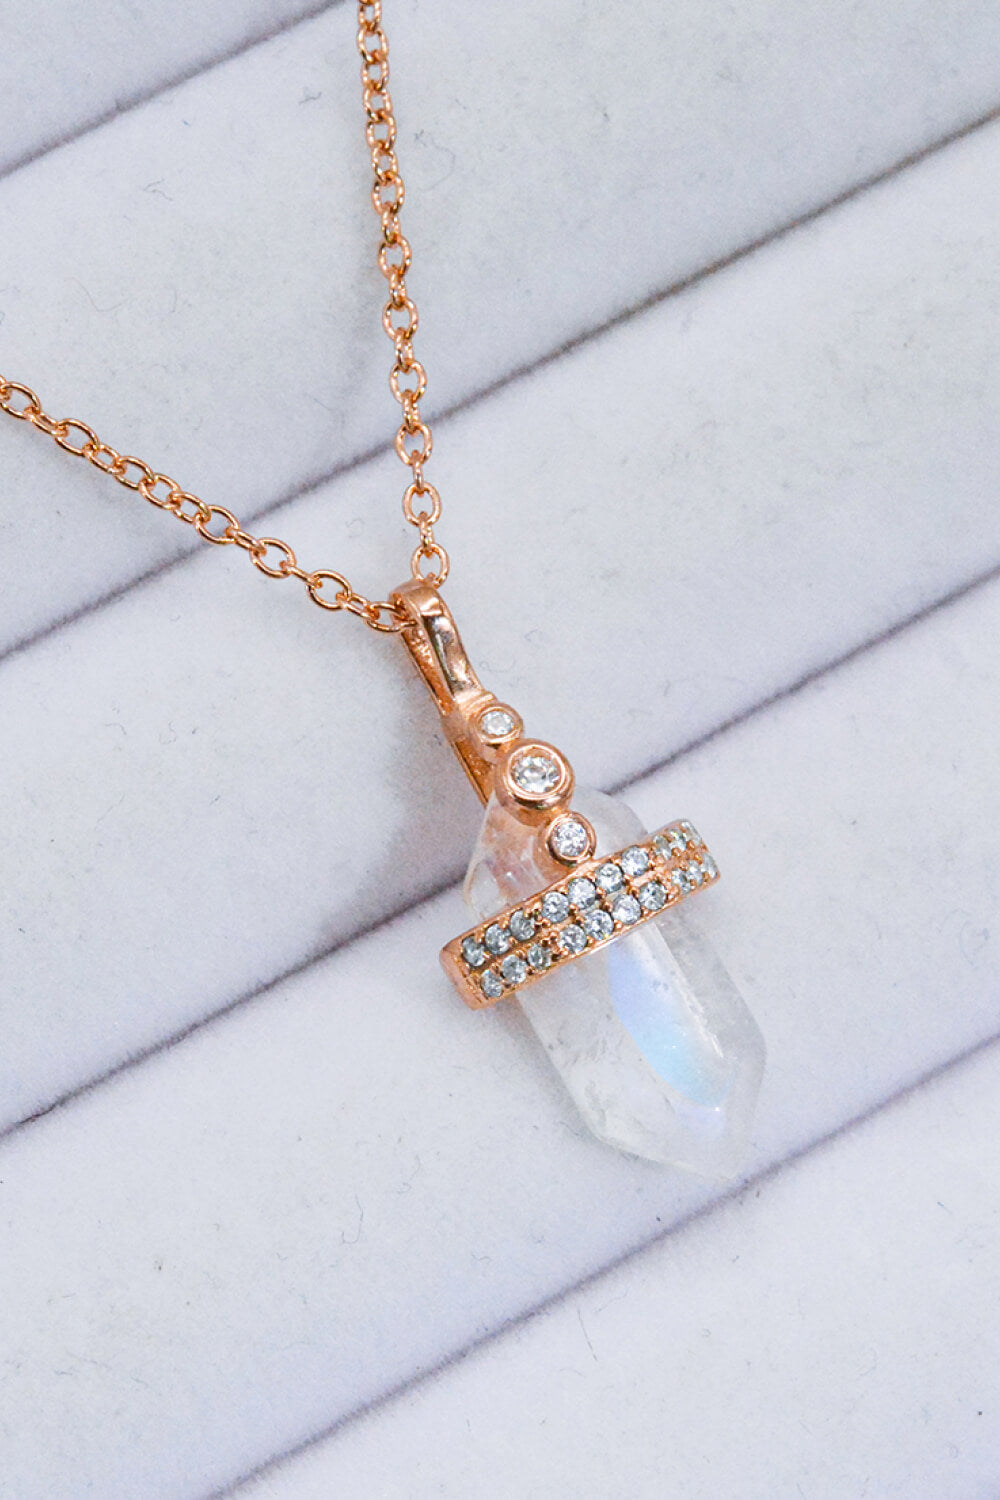 925 Sterling Silver Moonstone Pendant Necklace - Cheeky Chic Boutique